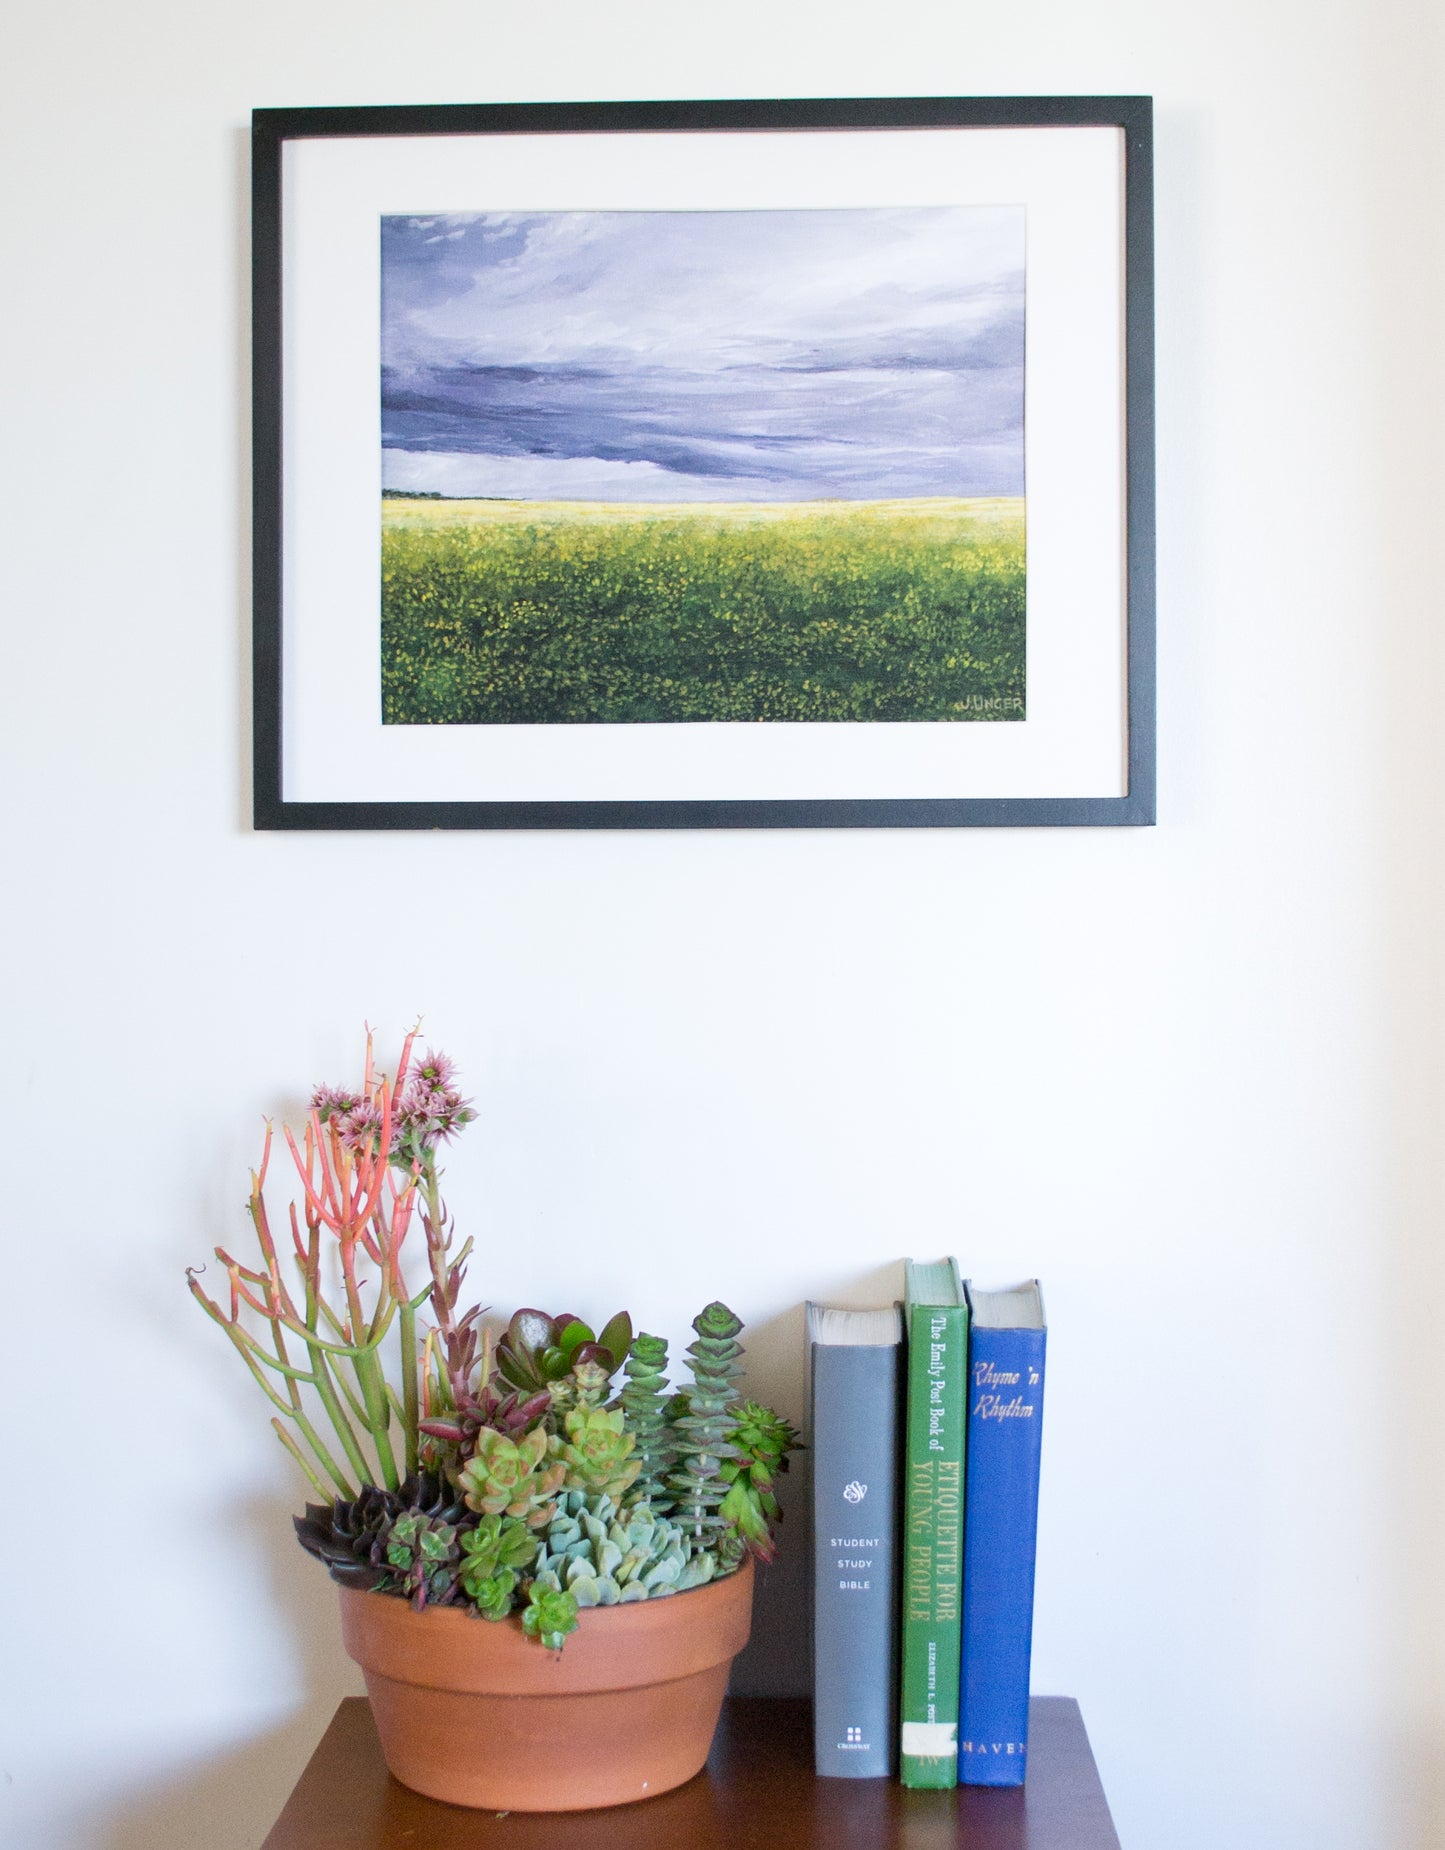 Canola Field, Limited Edition Print, 11 X 14,  Signed and Numbered. Unframed.